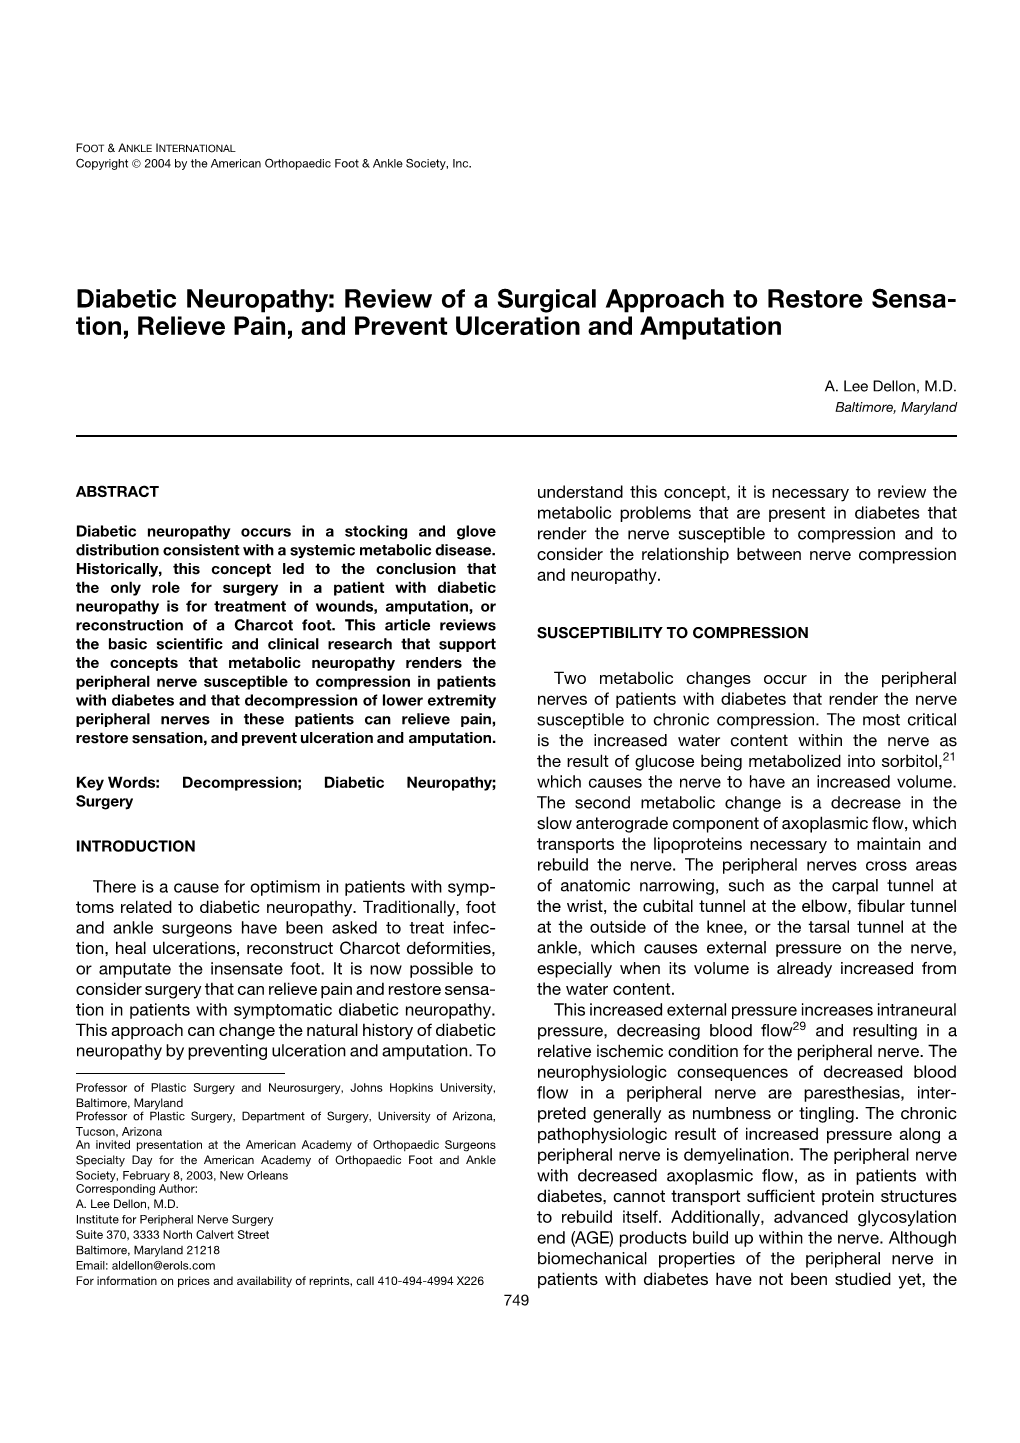 Diabetic Neuropathy: Review of a Surgical Approach to Restore Sensa- Tion, Relieve Pain, and Prevent Ulceration and Amputation